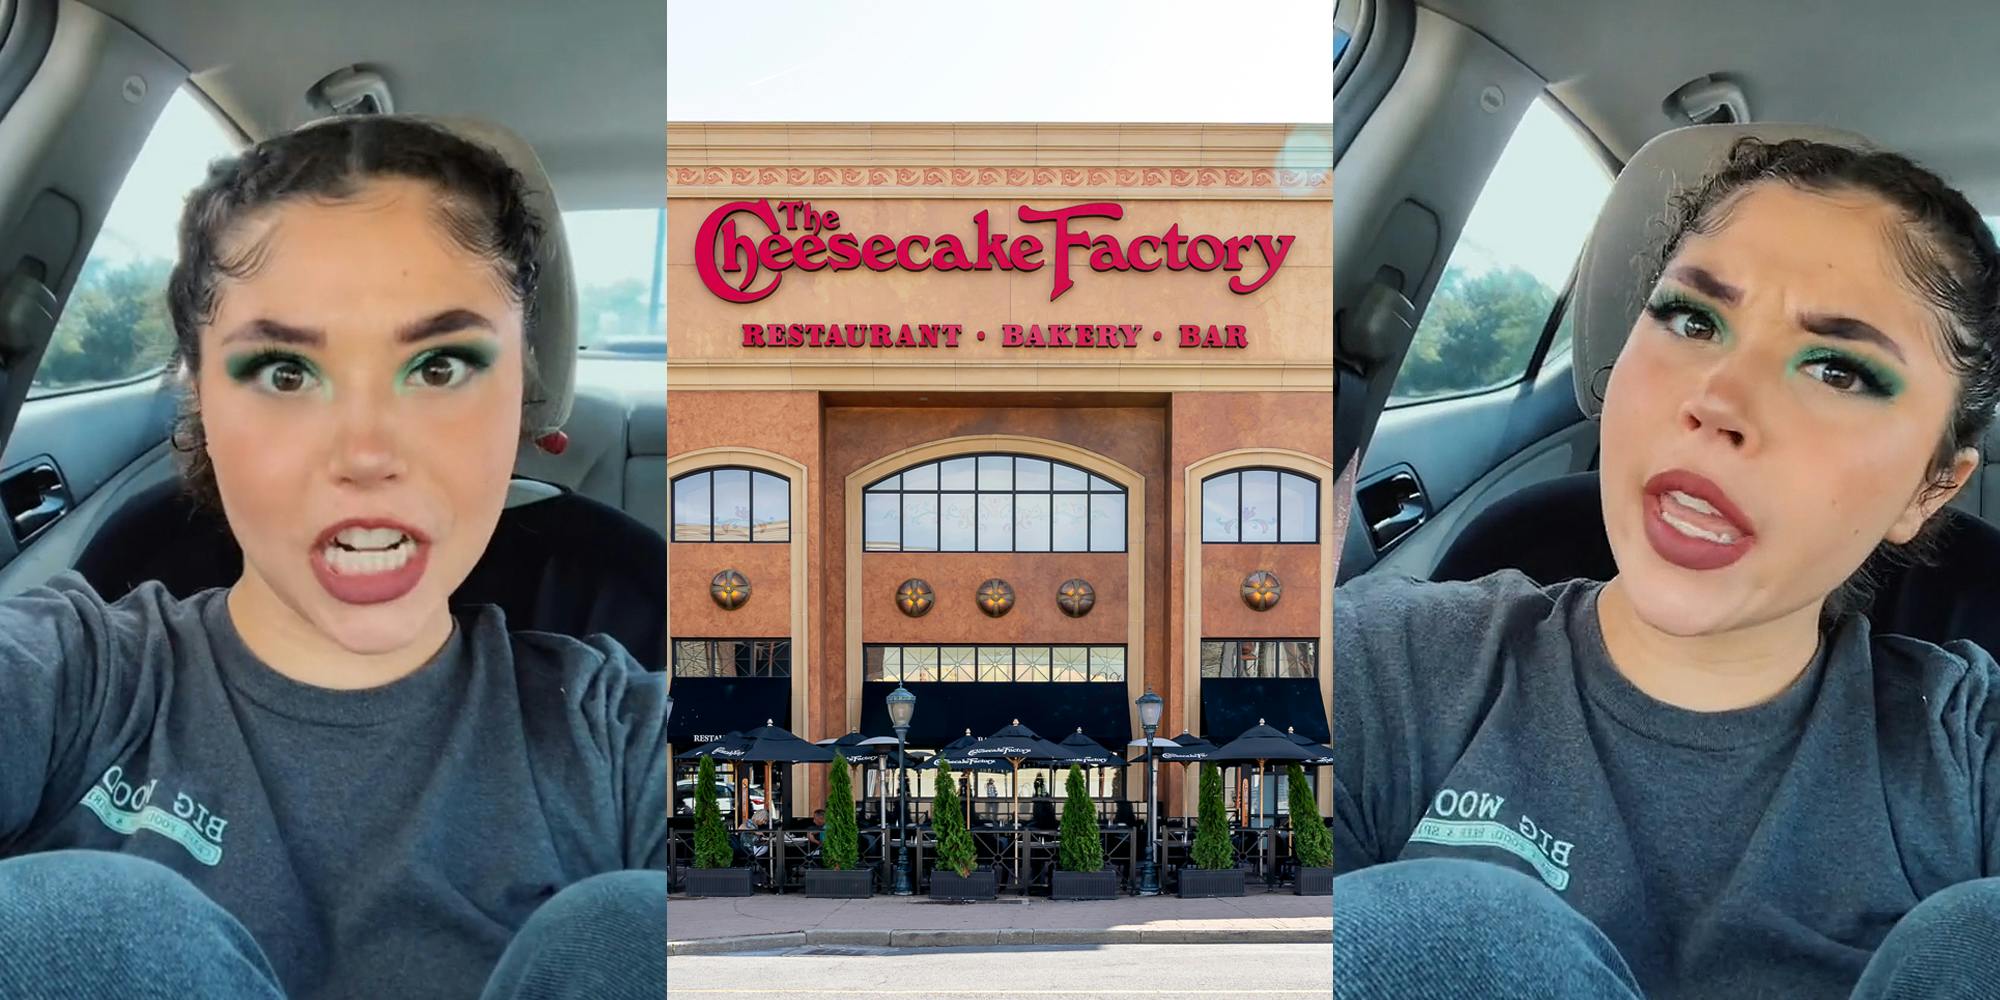 woman speaking in car (l) The Cheesecake Factory building with sign (c) woman speaking in car (r)